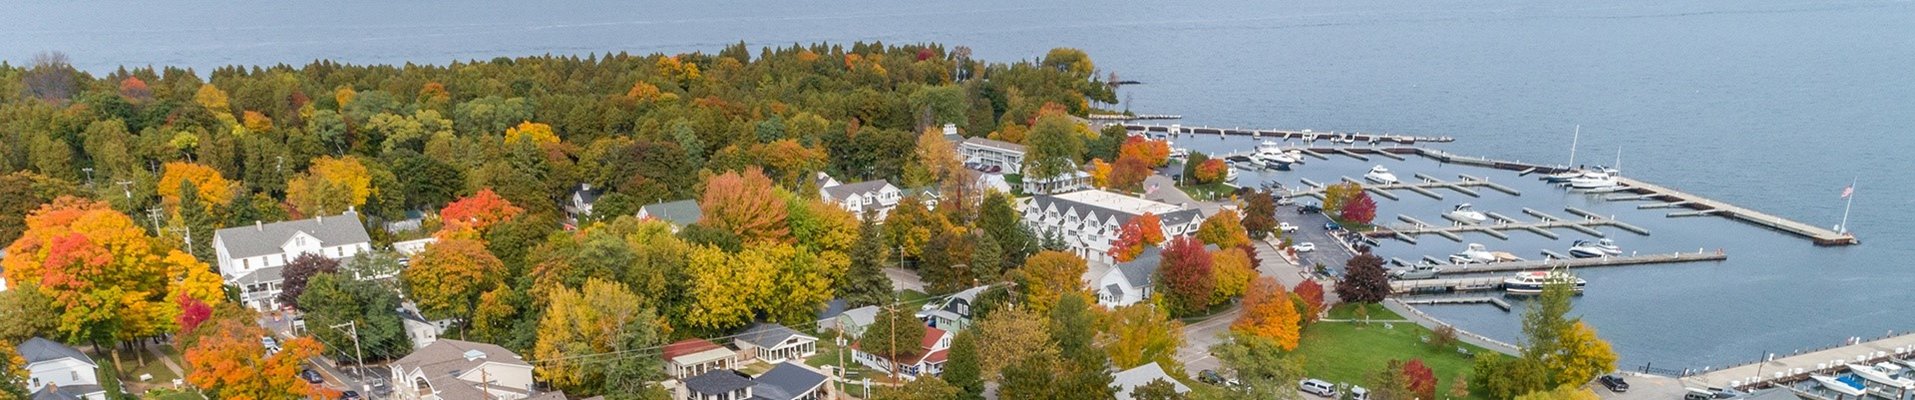 A town and marina surrounded by trees in their fall colors